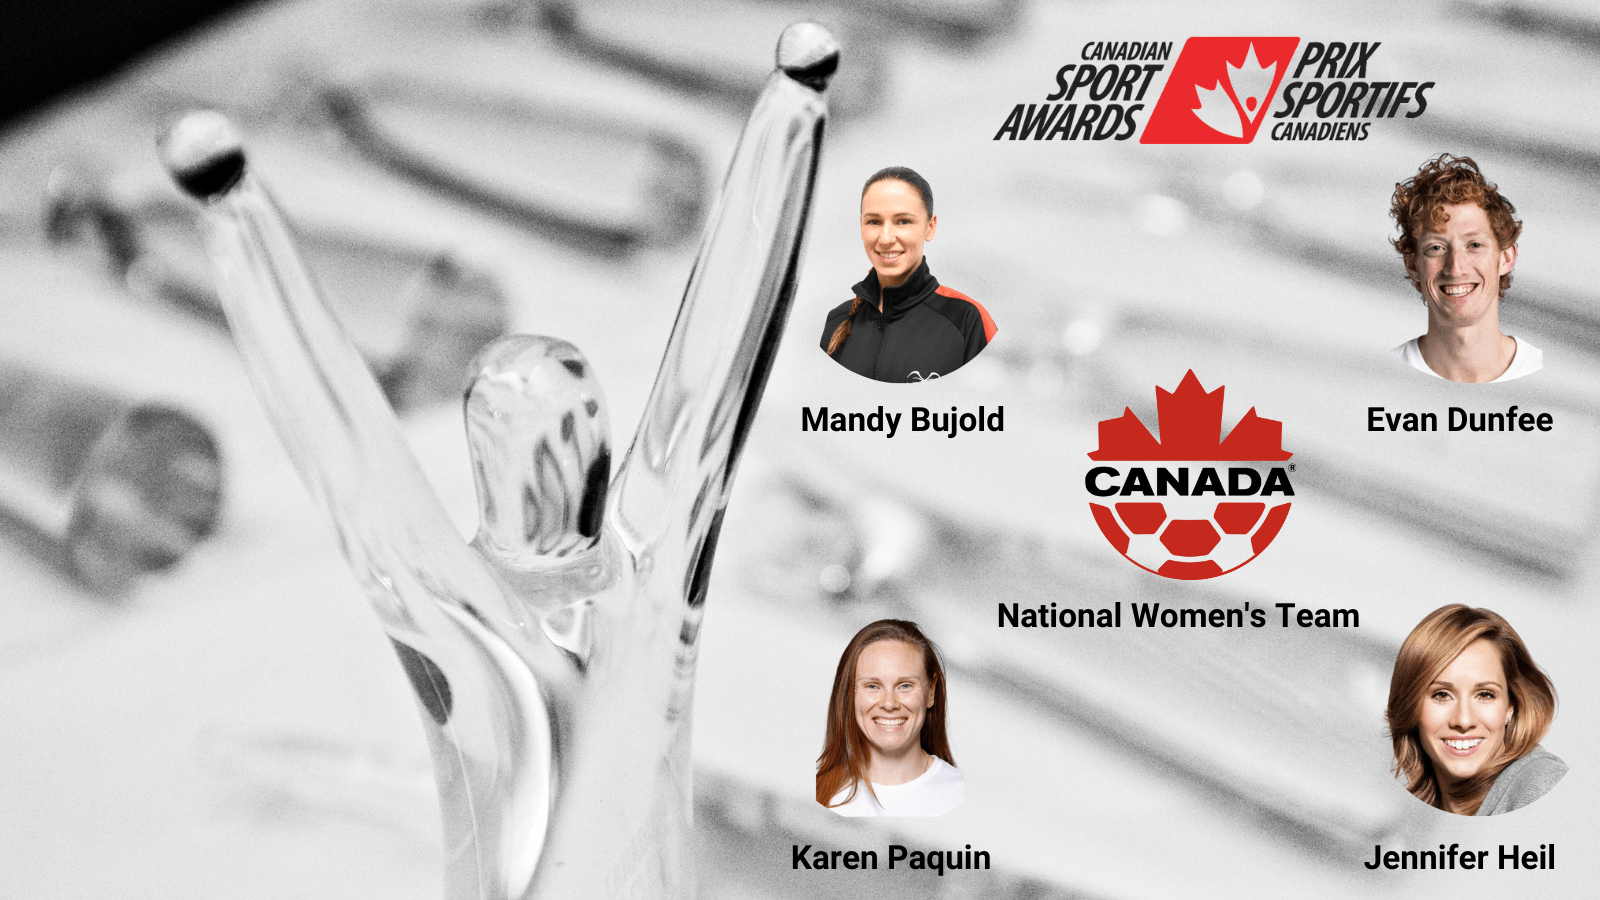 Bujold, Dunfee, Paquin, Heil, women’s soccer team honoured at 44th Canadian Sport Awards